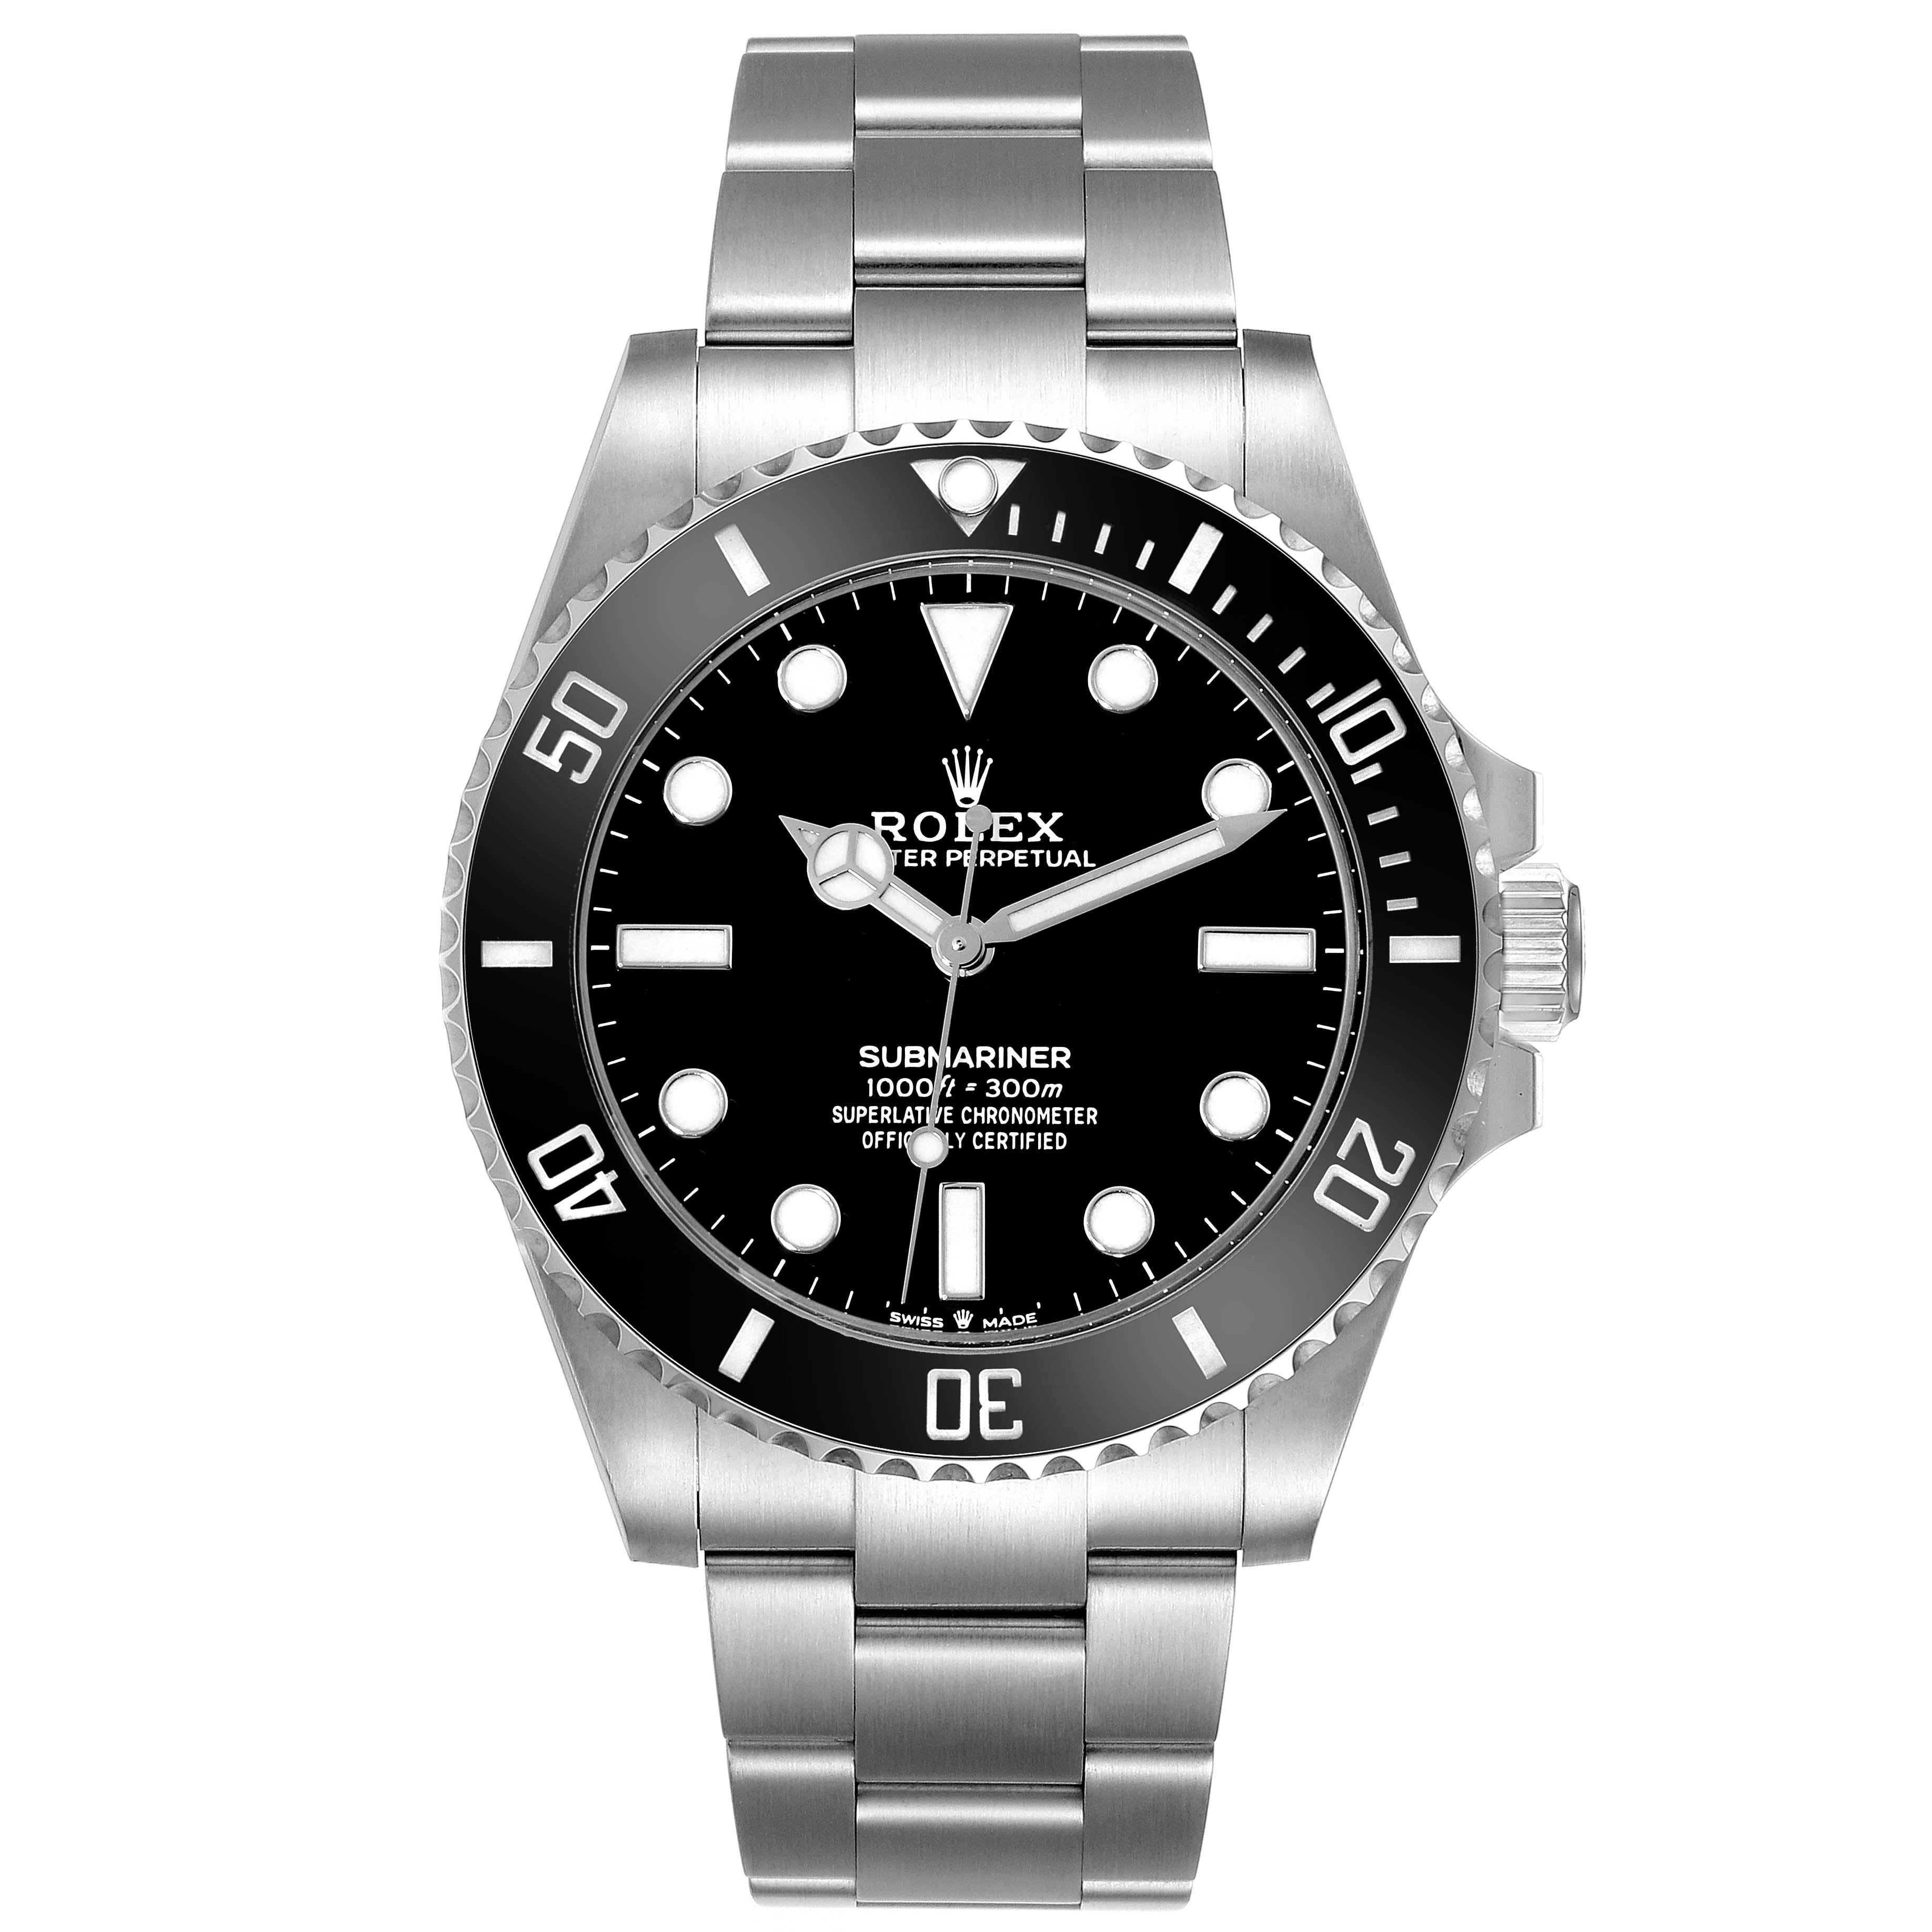 Rolex Submariner Non-Date Ceramic Bezel Steel Mens Watch 124060 Unworn. Officially certified chronometer automatic self-winding movement. Stainless steel case 41.0 mm in diameter. Rolex logo on the crown. Special time-lapse unidirectional rotating